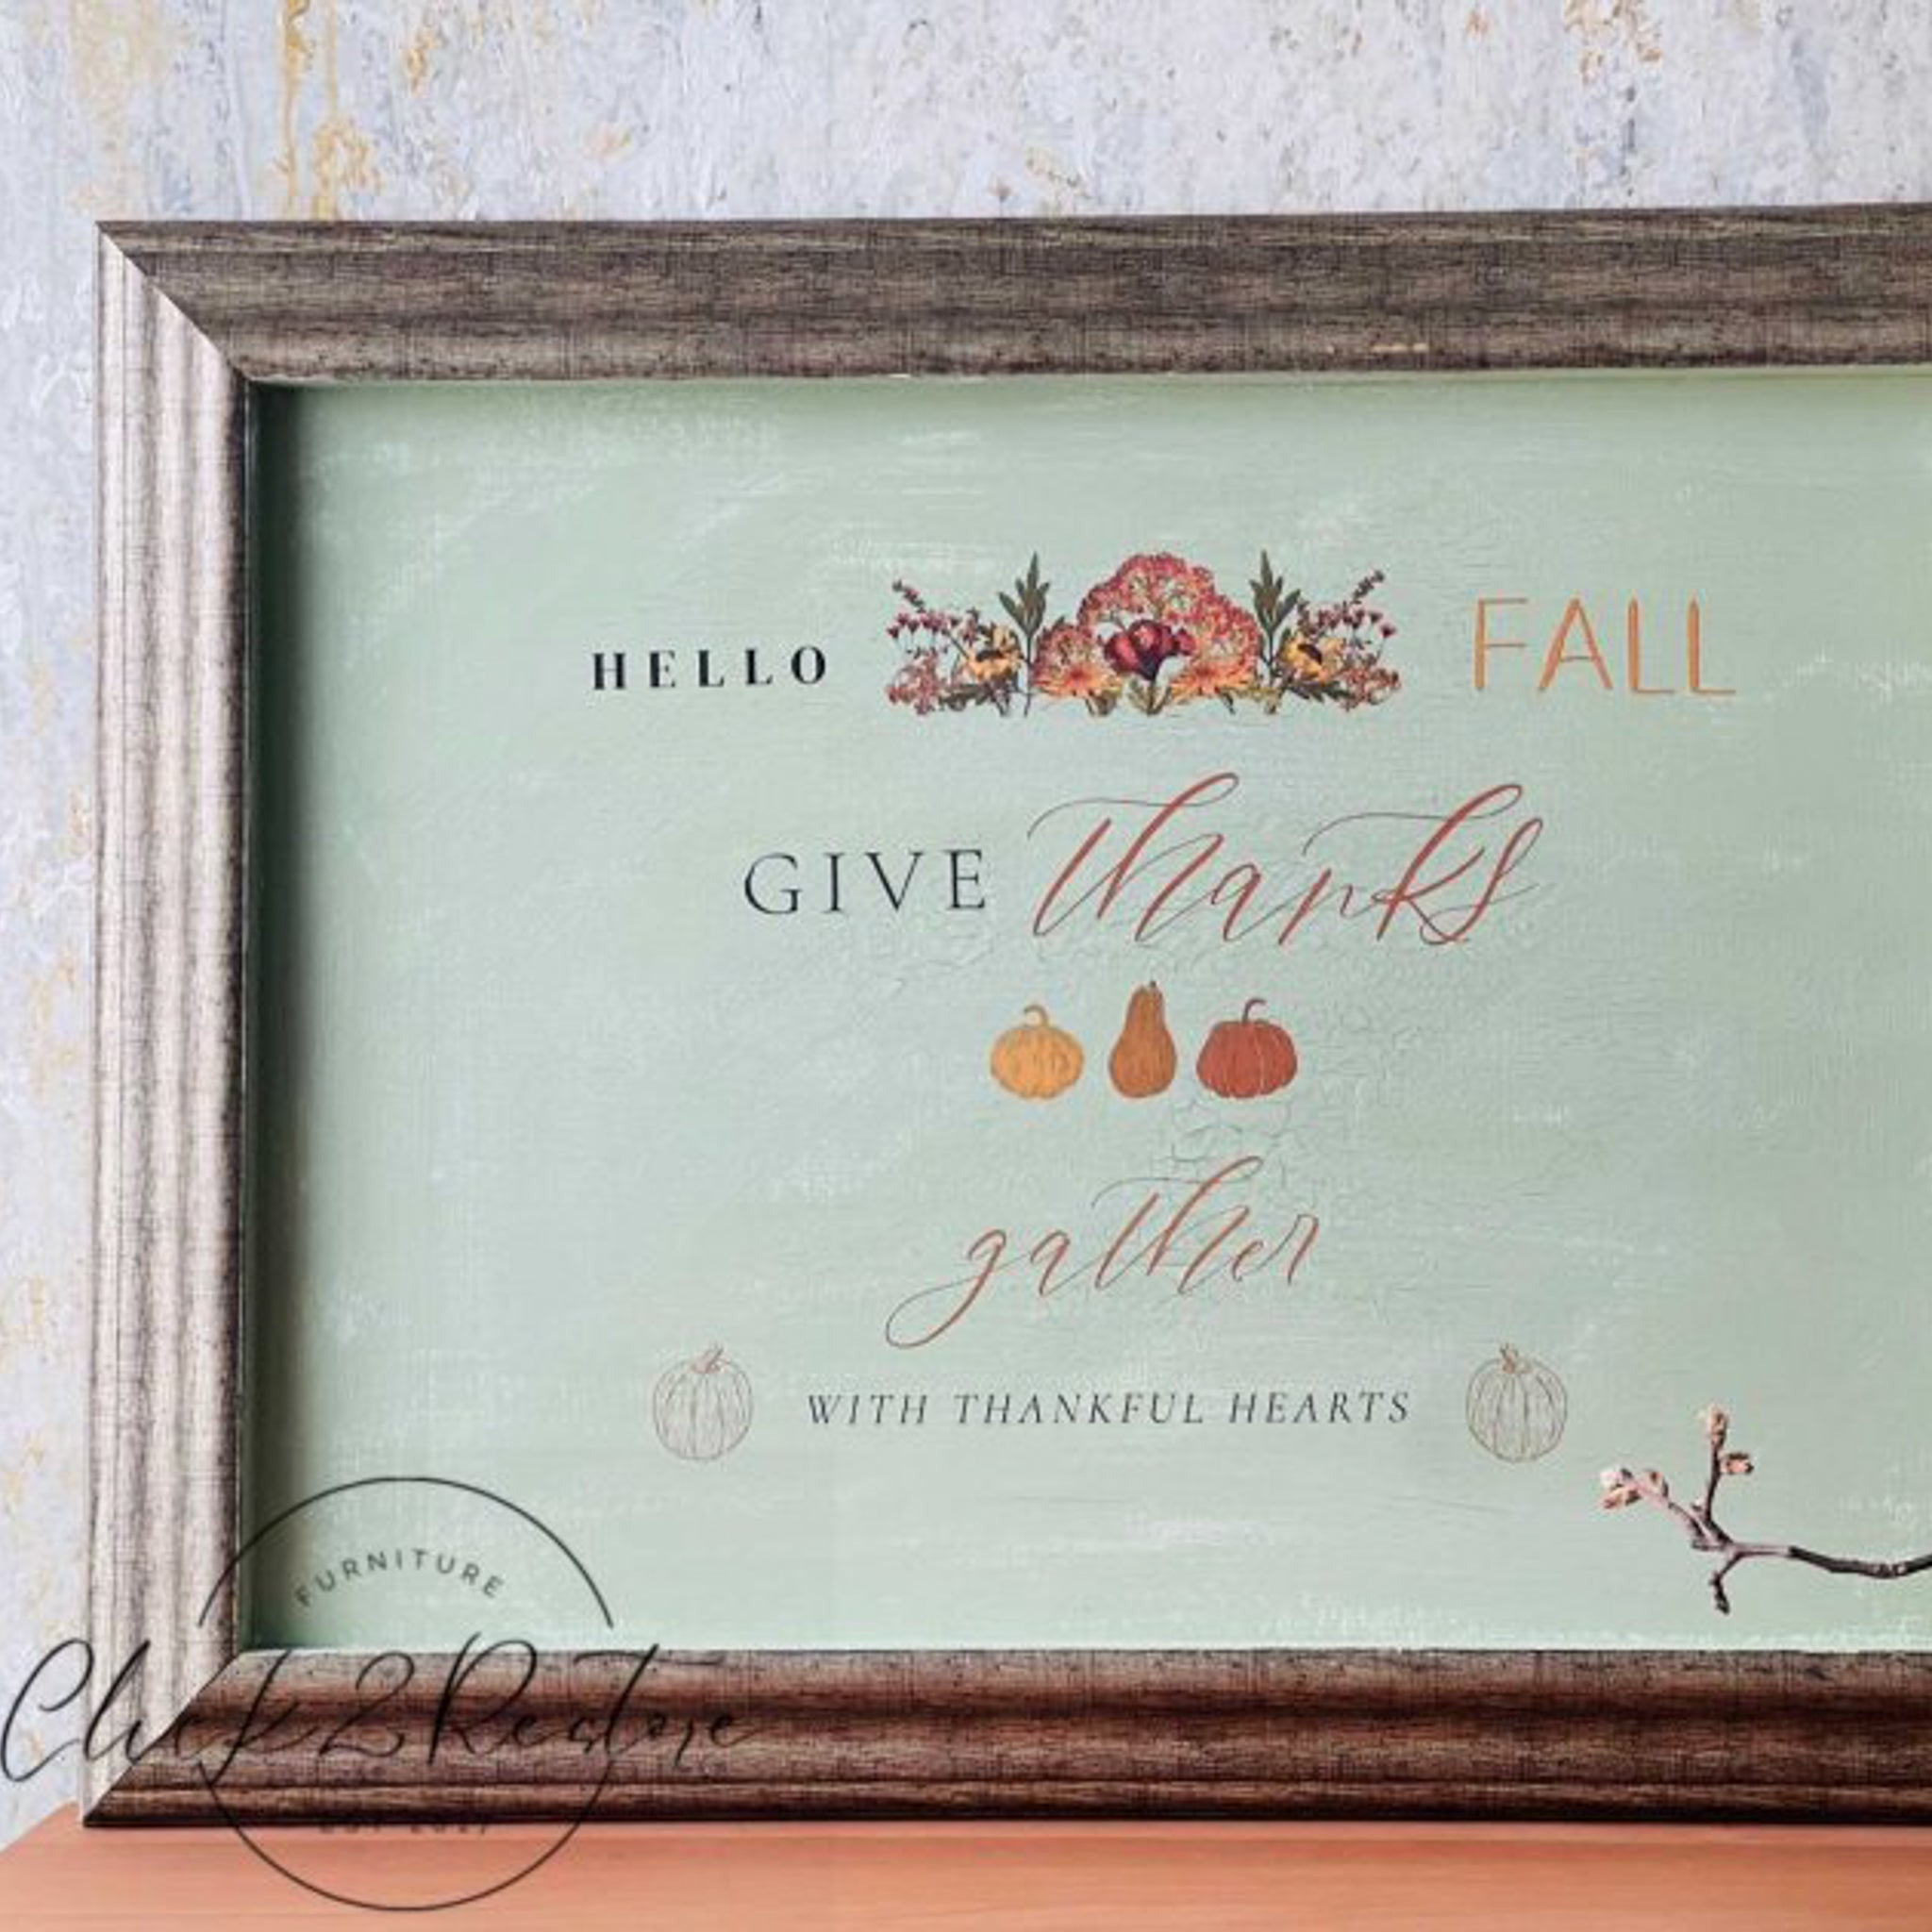 A picture frame project refurbished by Click 2 Restore features the Fall Festive small transfer.